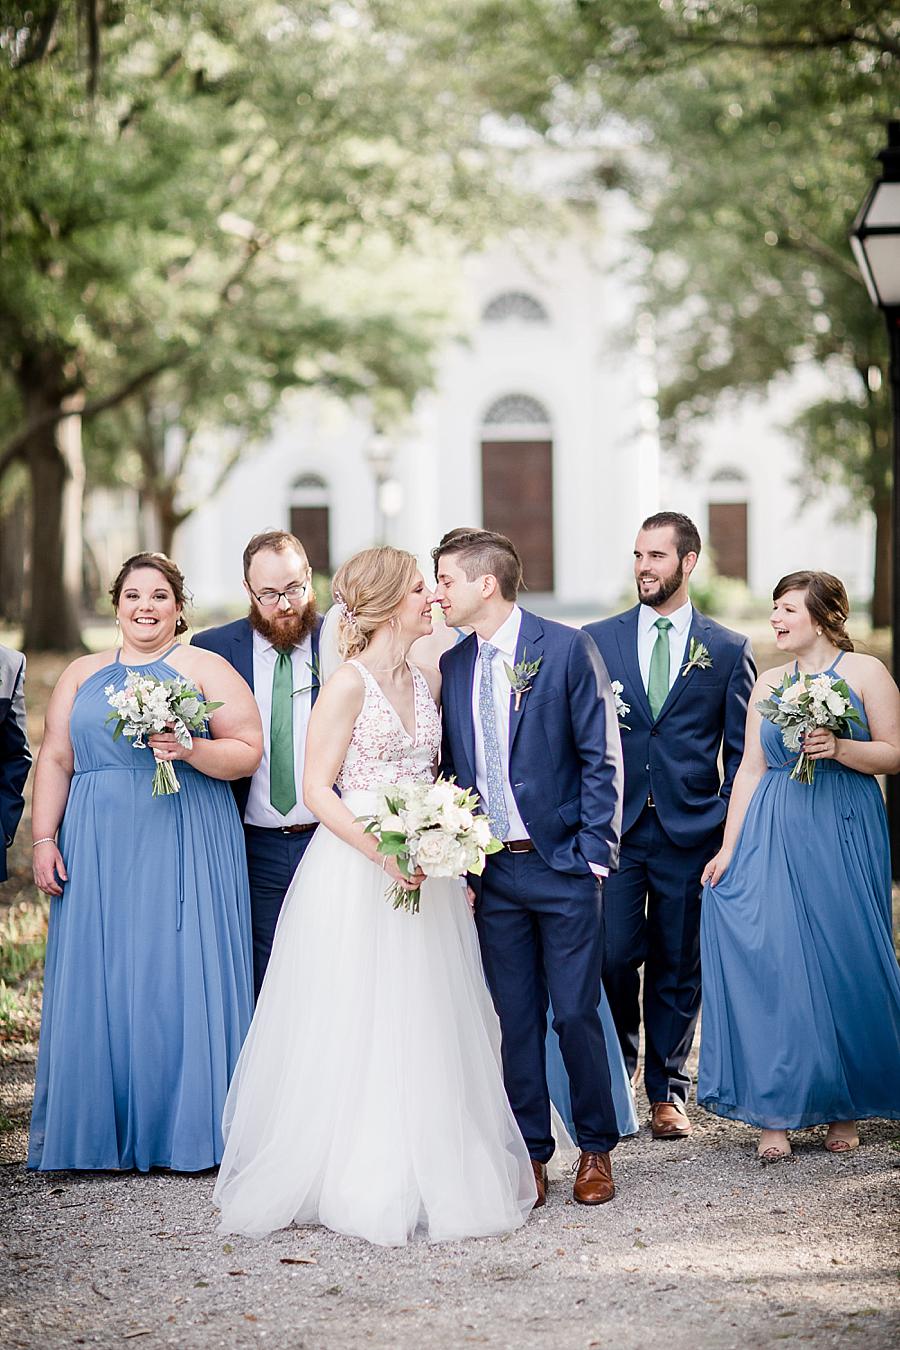 Nose to nose at this Upstairs at Midtown Wedding by Knoxville Wedding Photographer, Amanda May Photos.